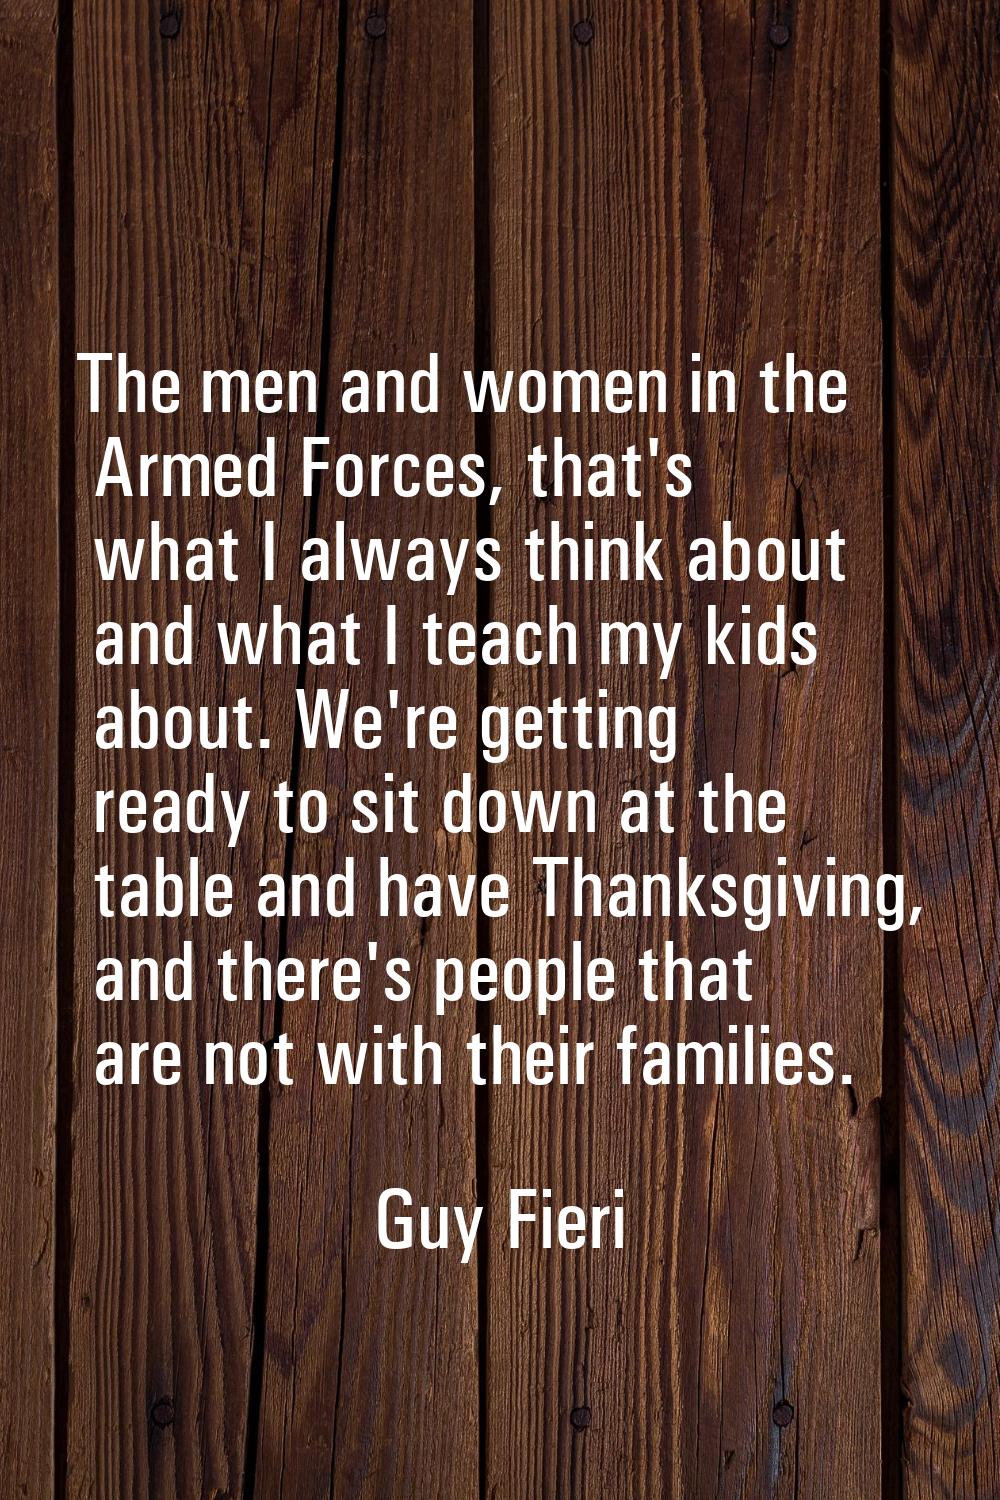 The men and women in the Armed Forces, that's what I always think about and what I teach my kids ab